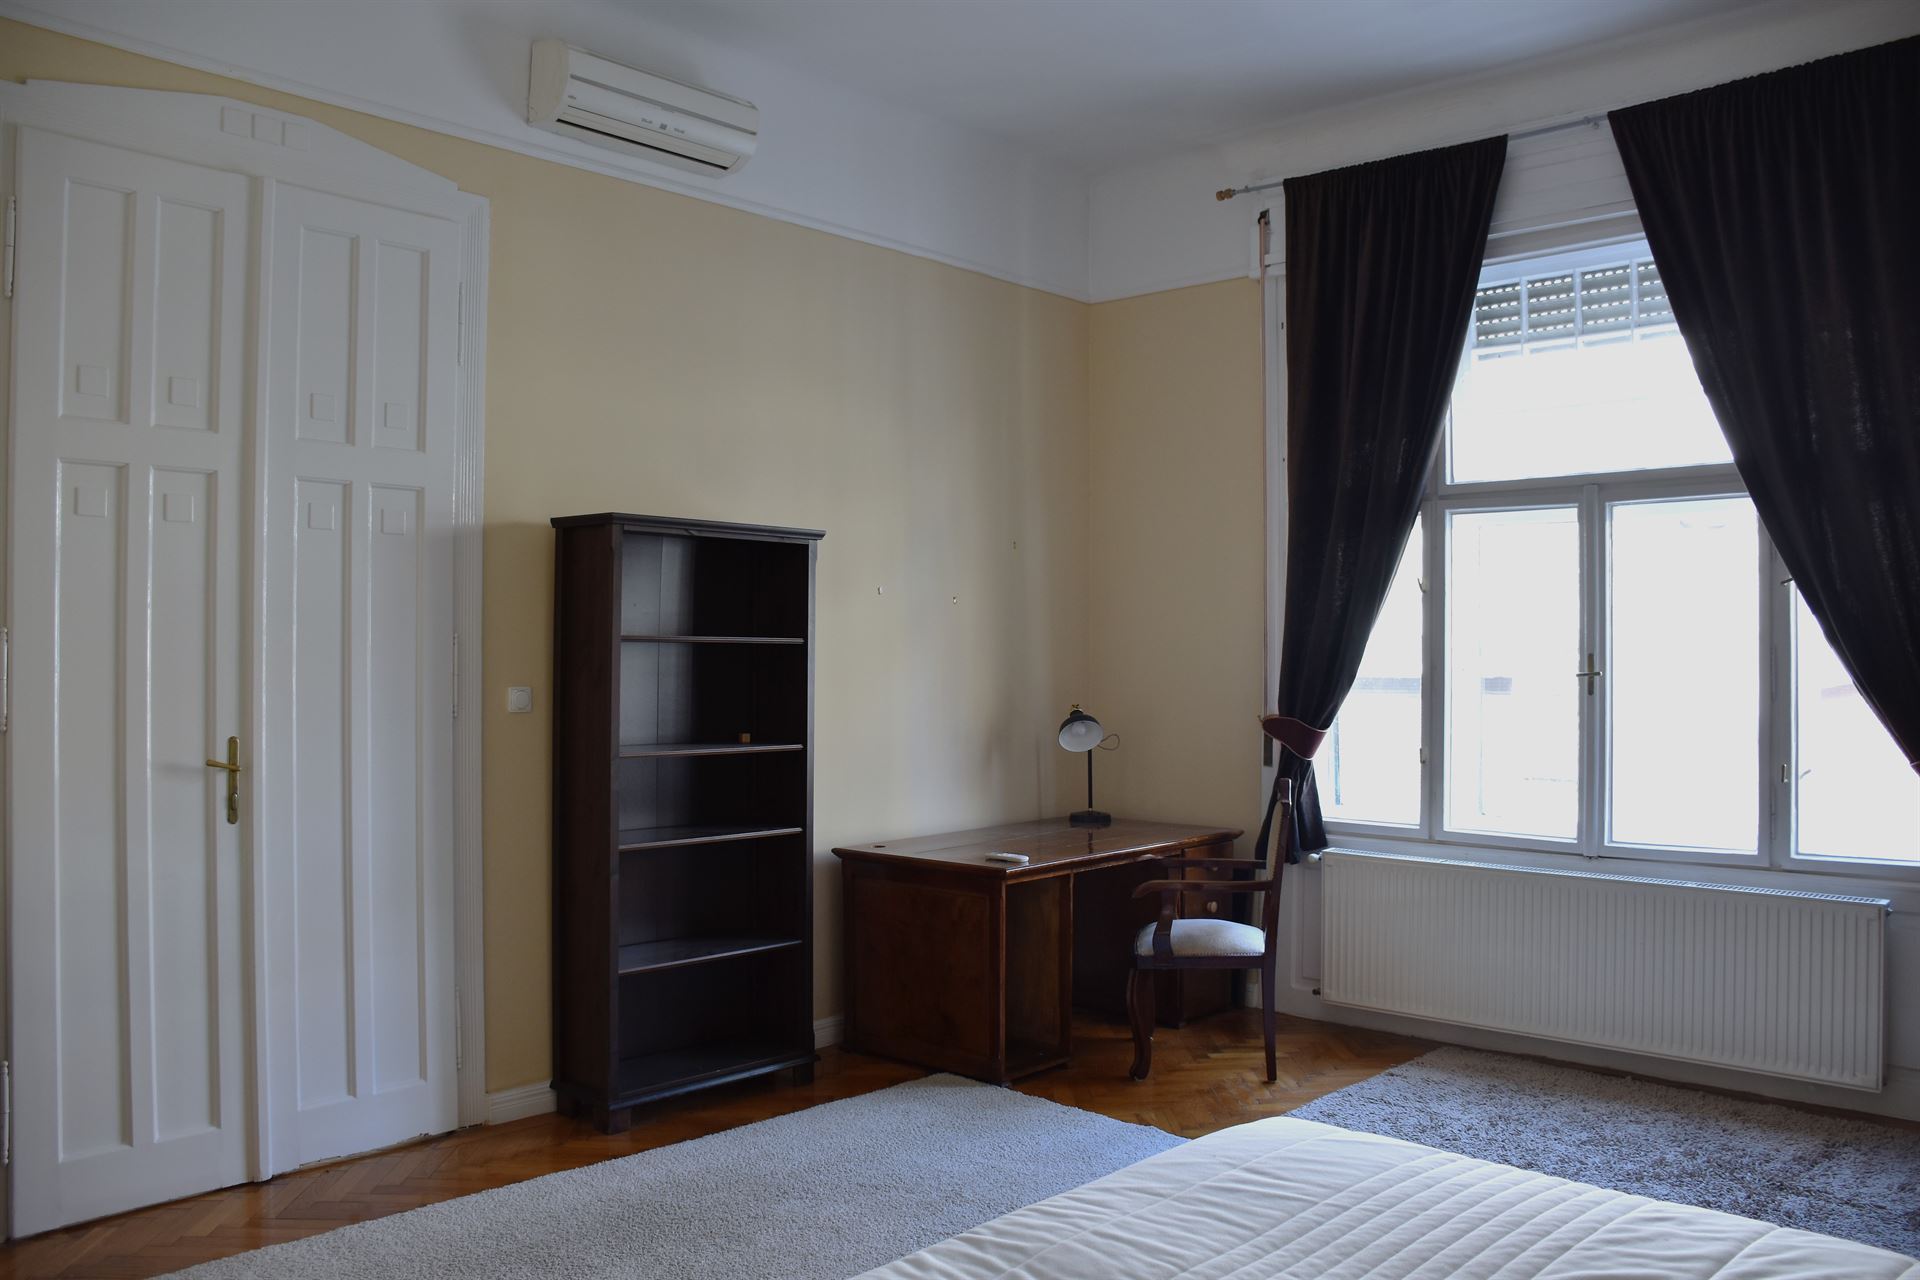 budapest-real-estate-long-term-lease-rental-apartment-downtown-near-opera-big-flat-for-rent-with-balcony24